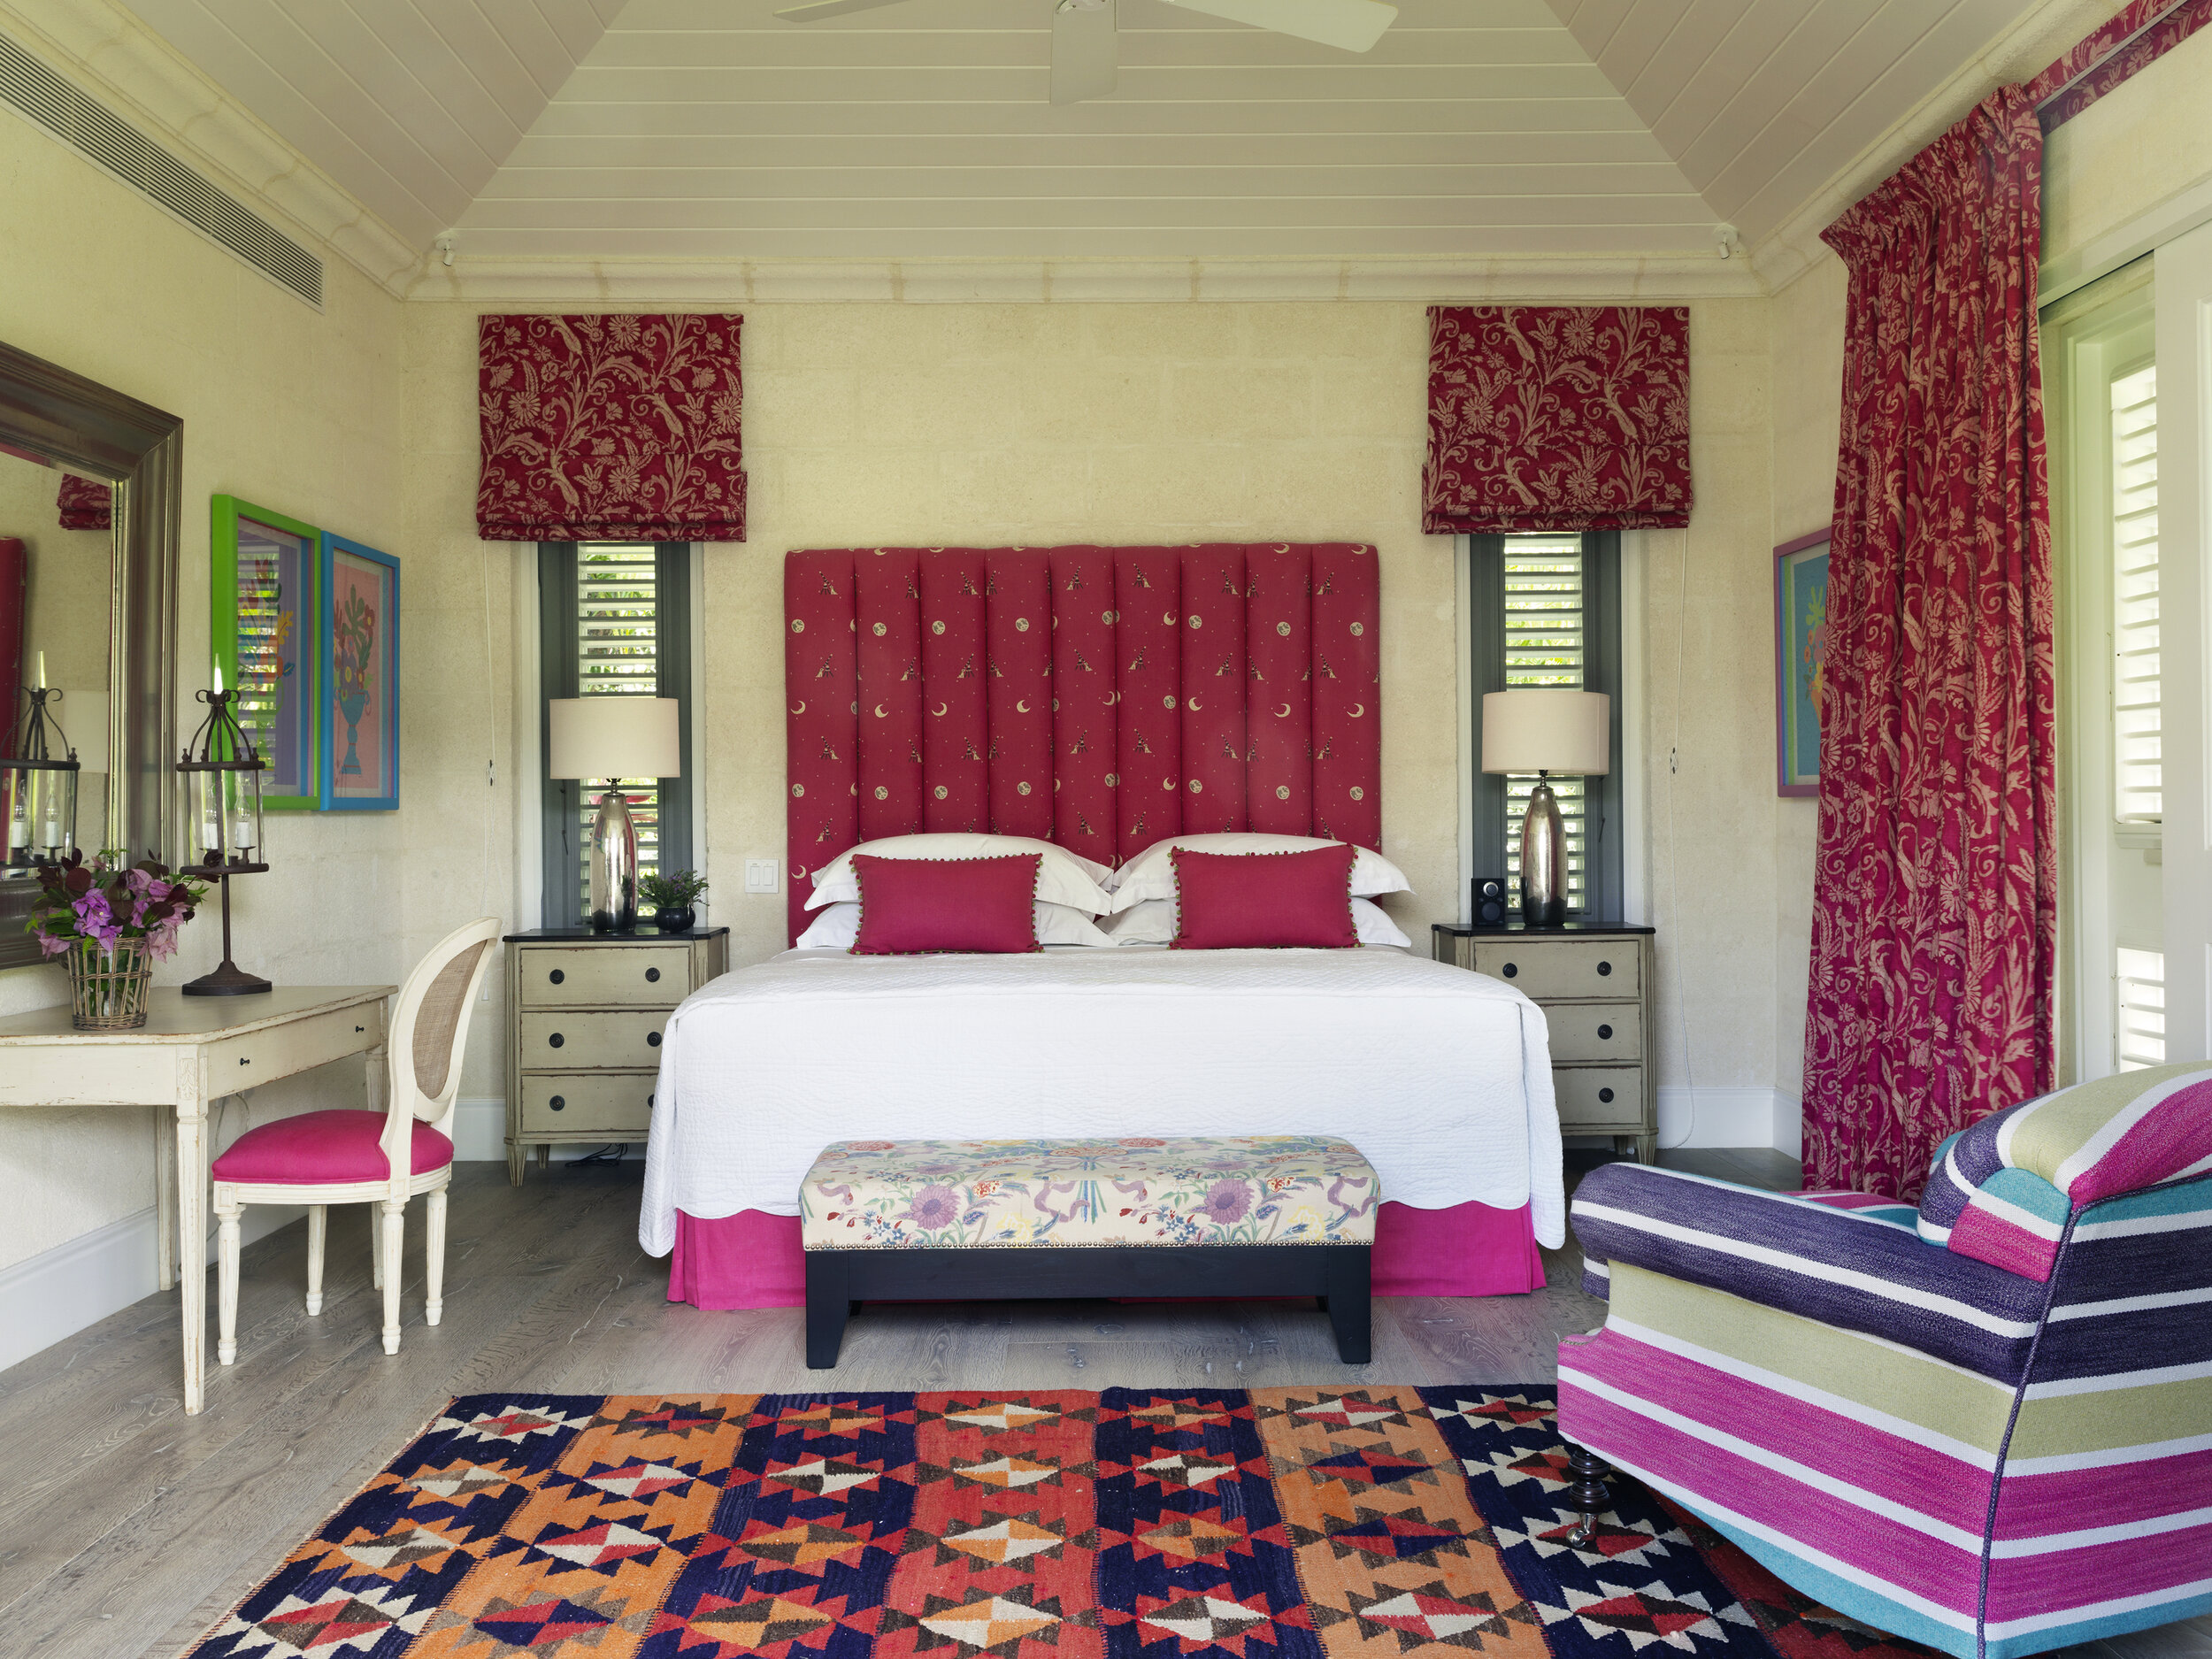   One of the four bedrooms, designed in Kit Kemp’s signature quirky style (photo credit: Rossferry)  